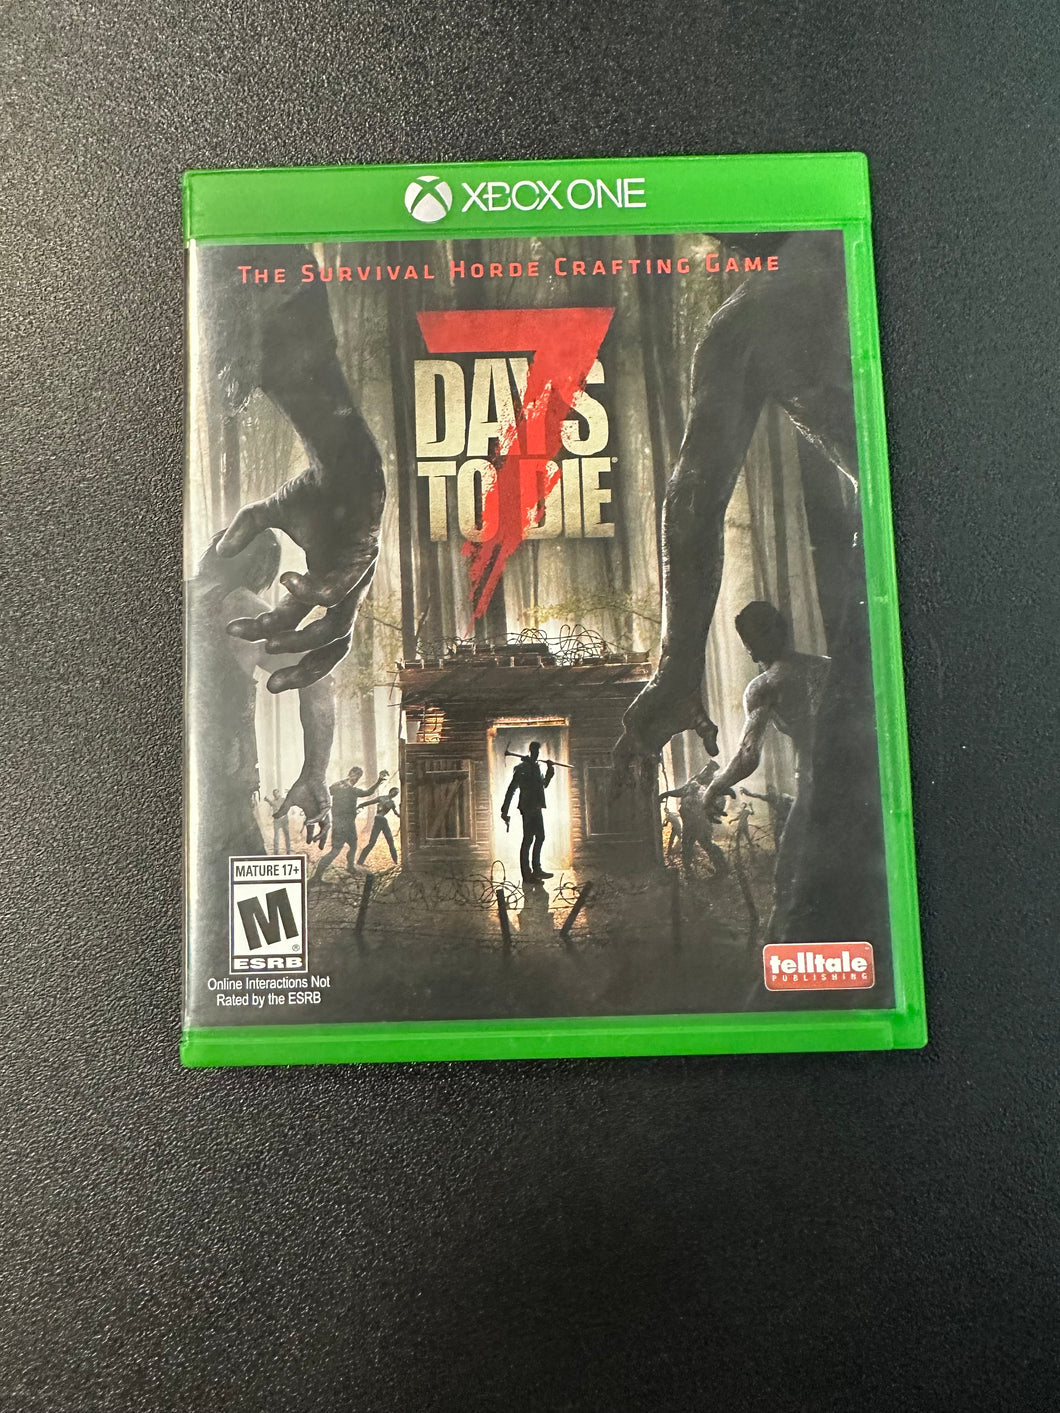 XBOX ONE 7 DAYS TO DIE PREOWNED GAME